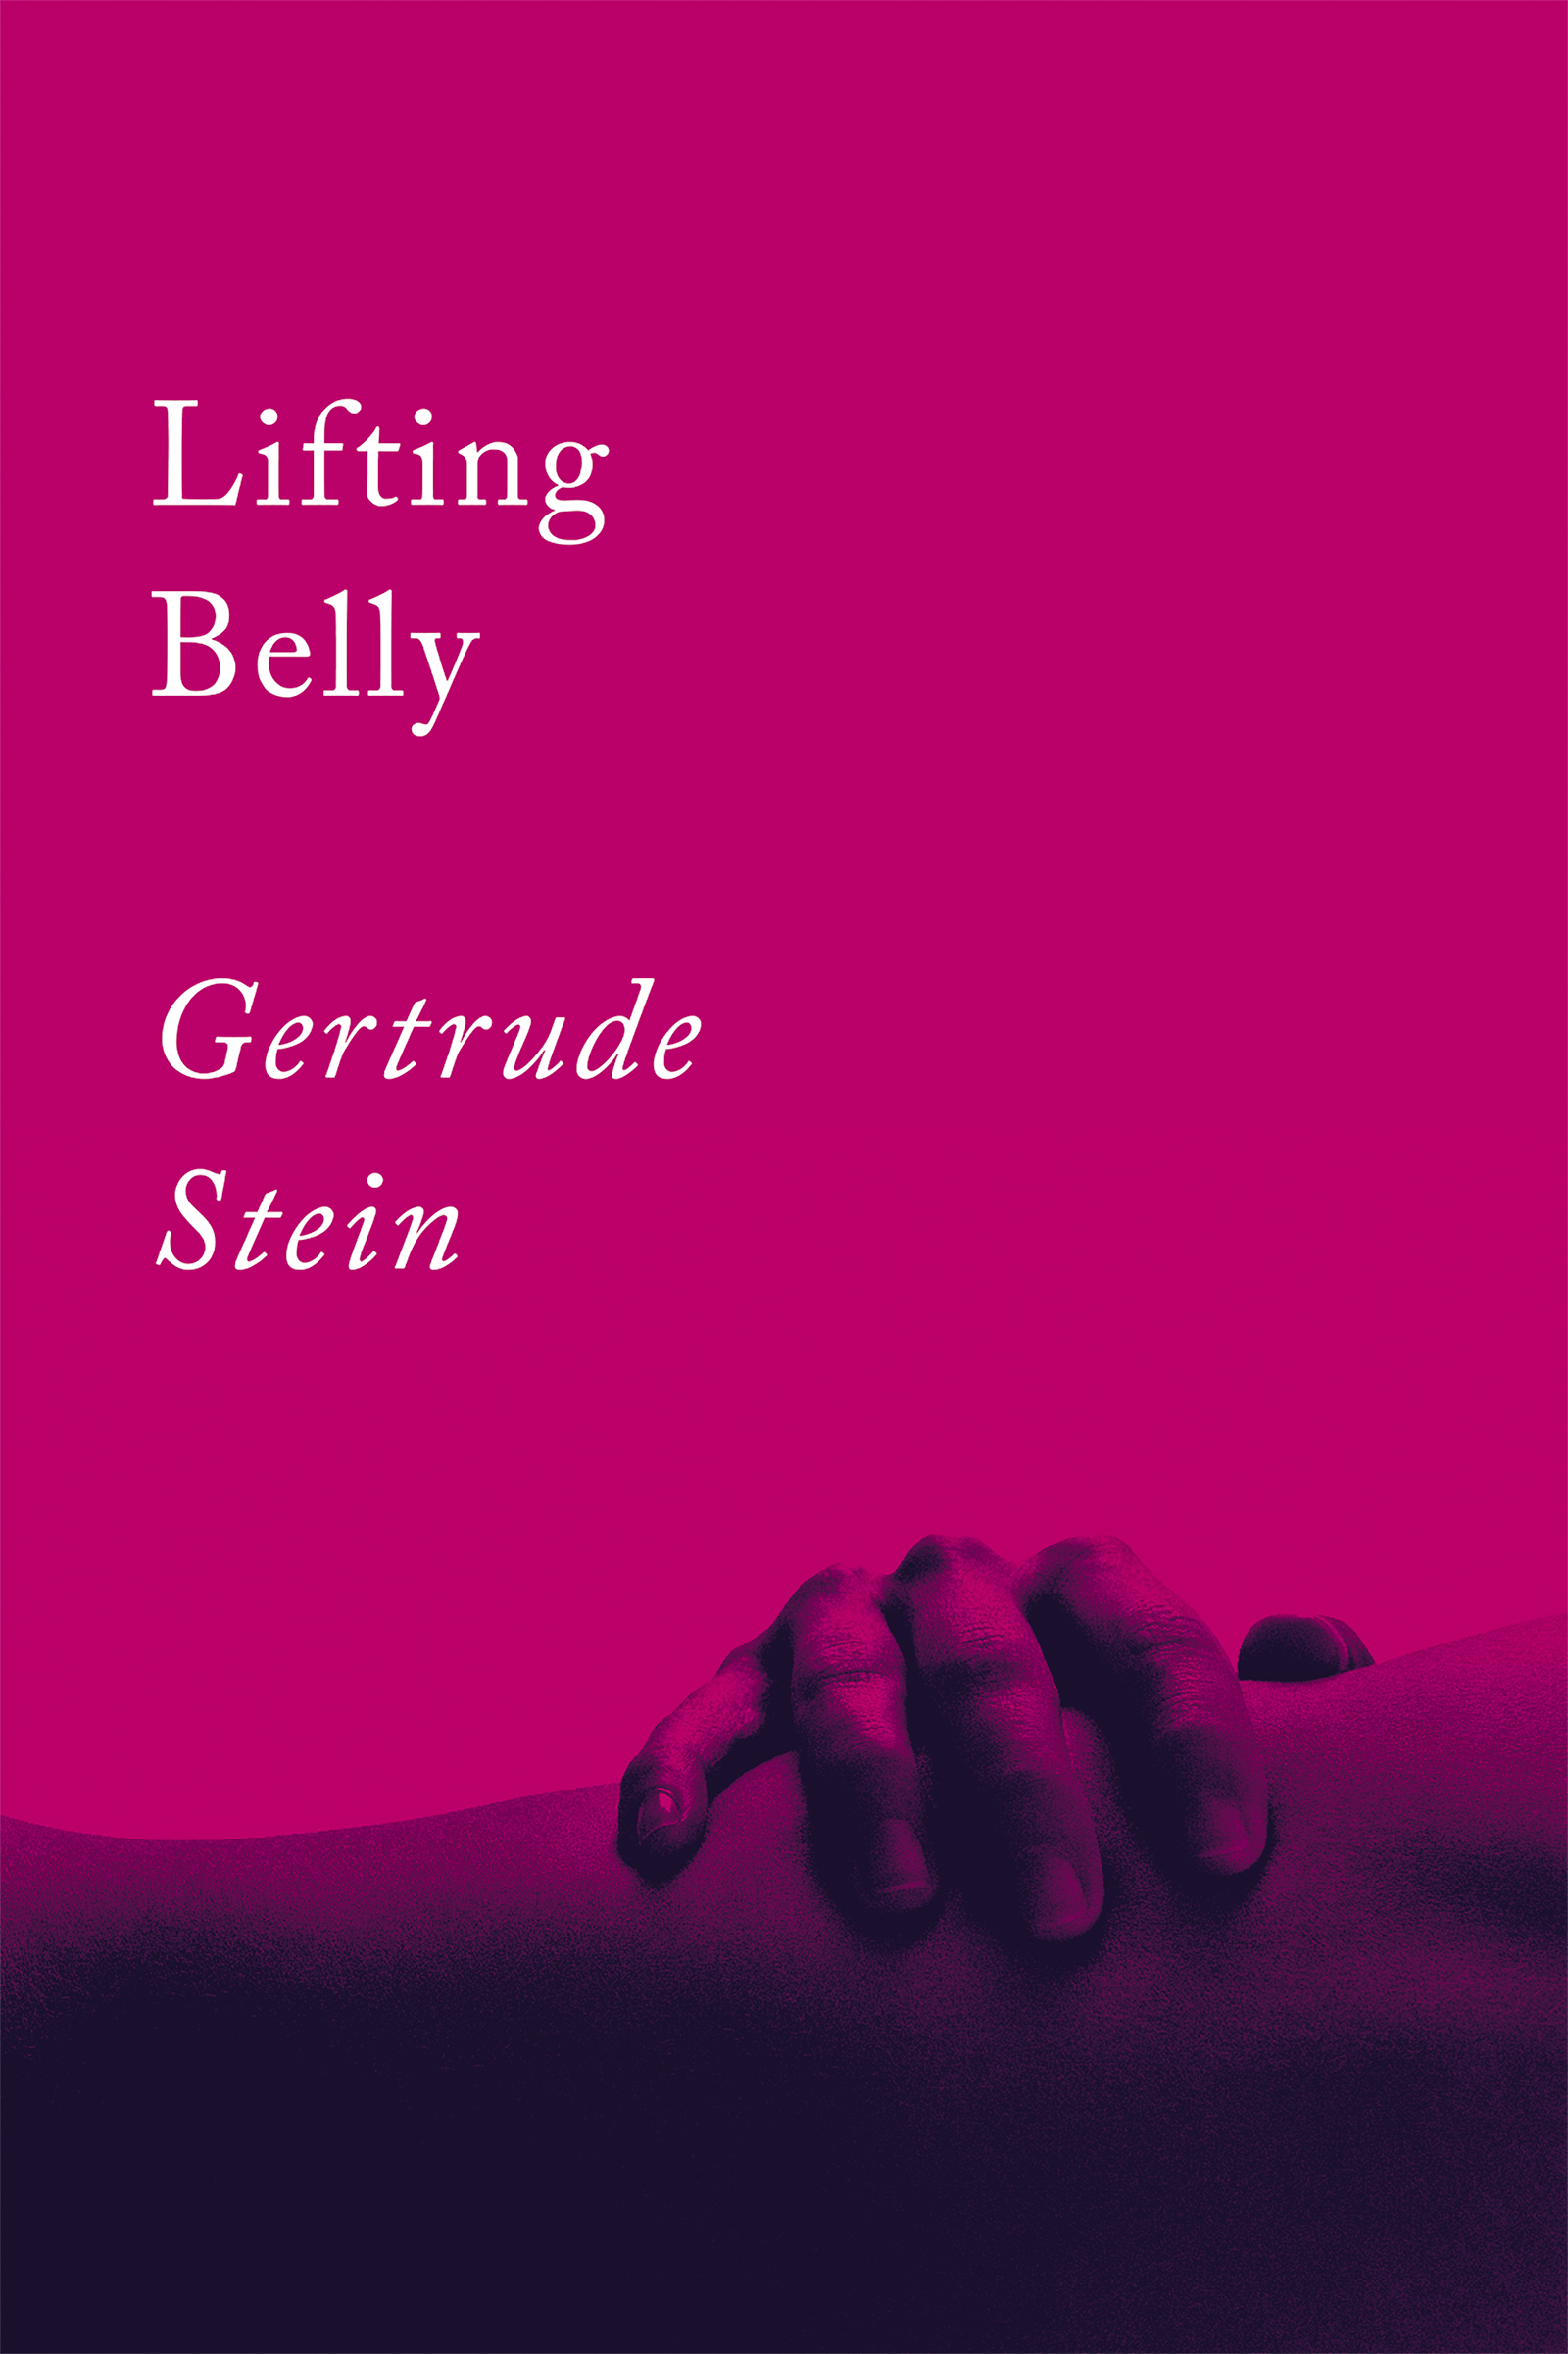 Lifting Belly – Judit Musachs